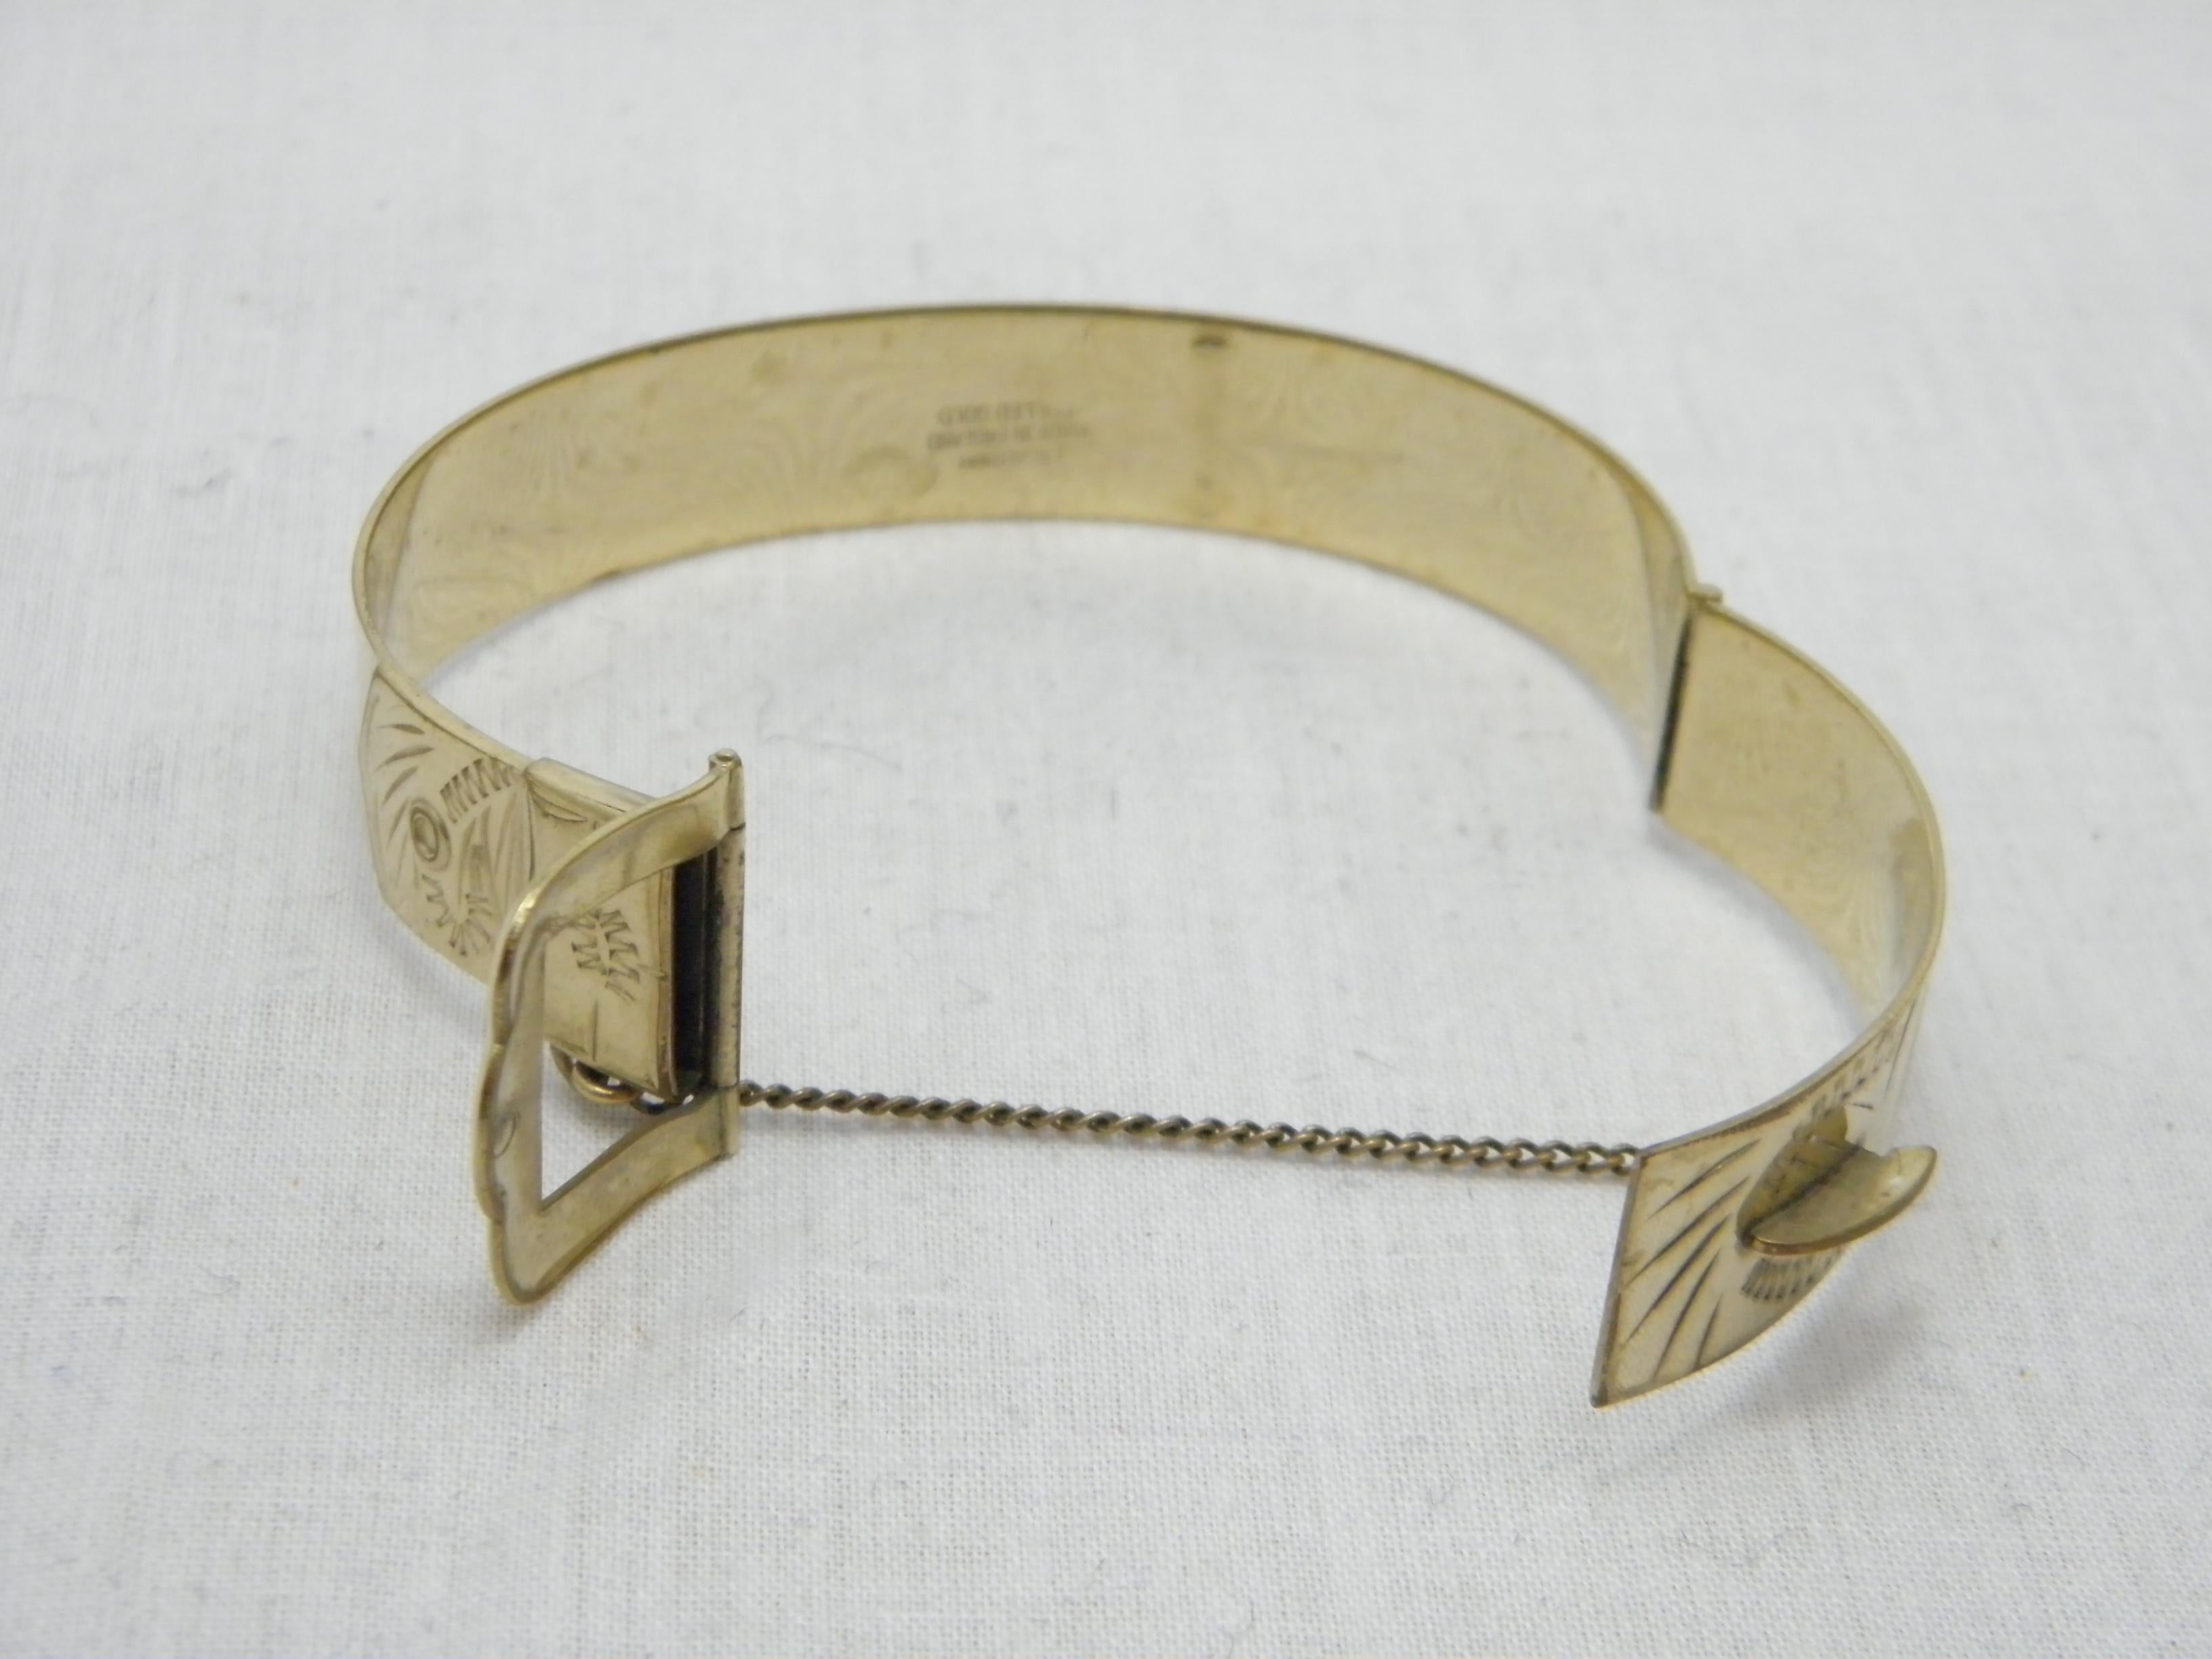 Vintage 12ct Gold 'Rolled' Buckle Cuff Bracelet Bangle 500 Purity Heavy 21g In Good Condition For Sale In Camelford, GB